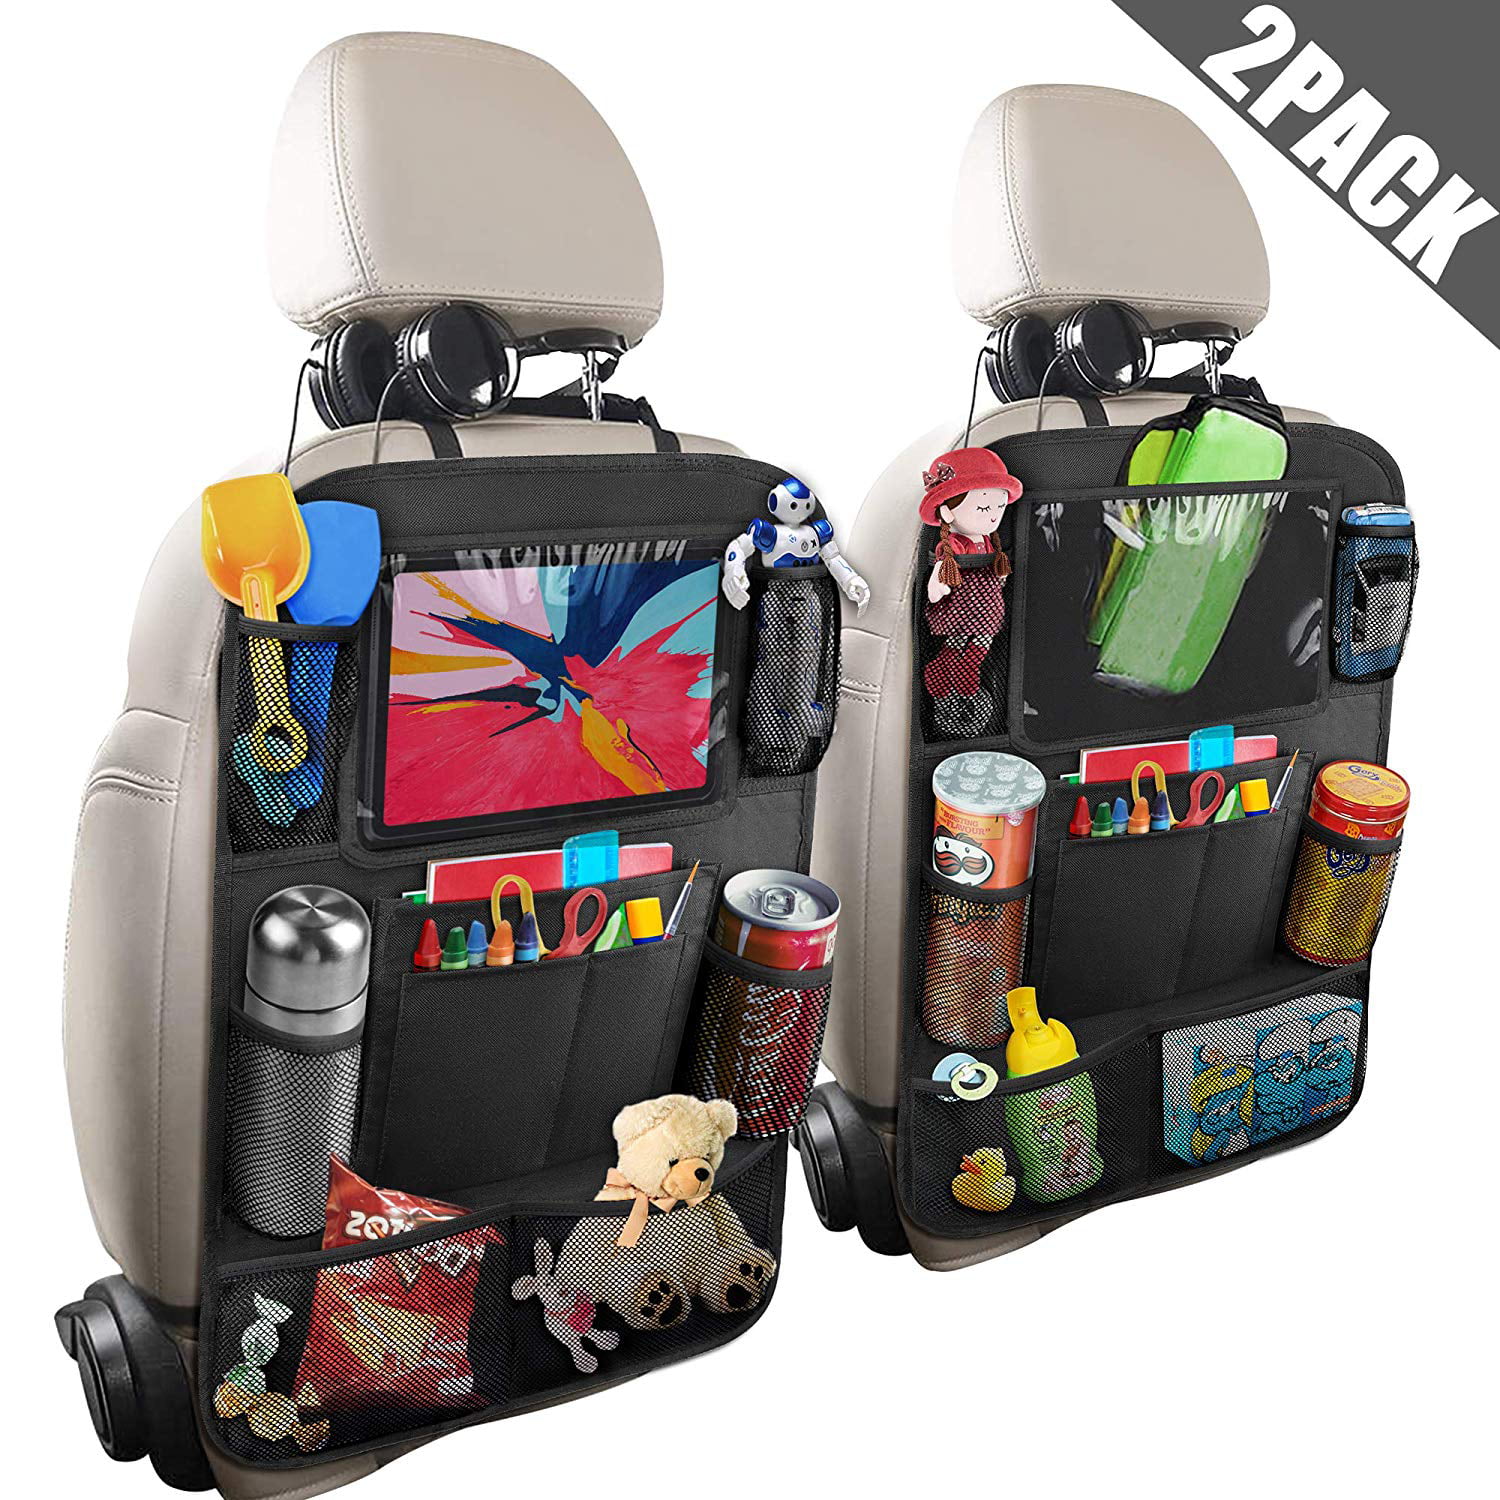 Has Mini Ipad and Bottle Holder; Foldable Table Tray for Kids Toys and Travel Accessories on Road Trips Car Seat Organizer by Stay Onn-PU Leather Backseat Organizer with 4-USB Charging Ports Black 